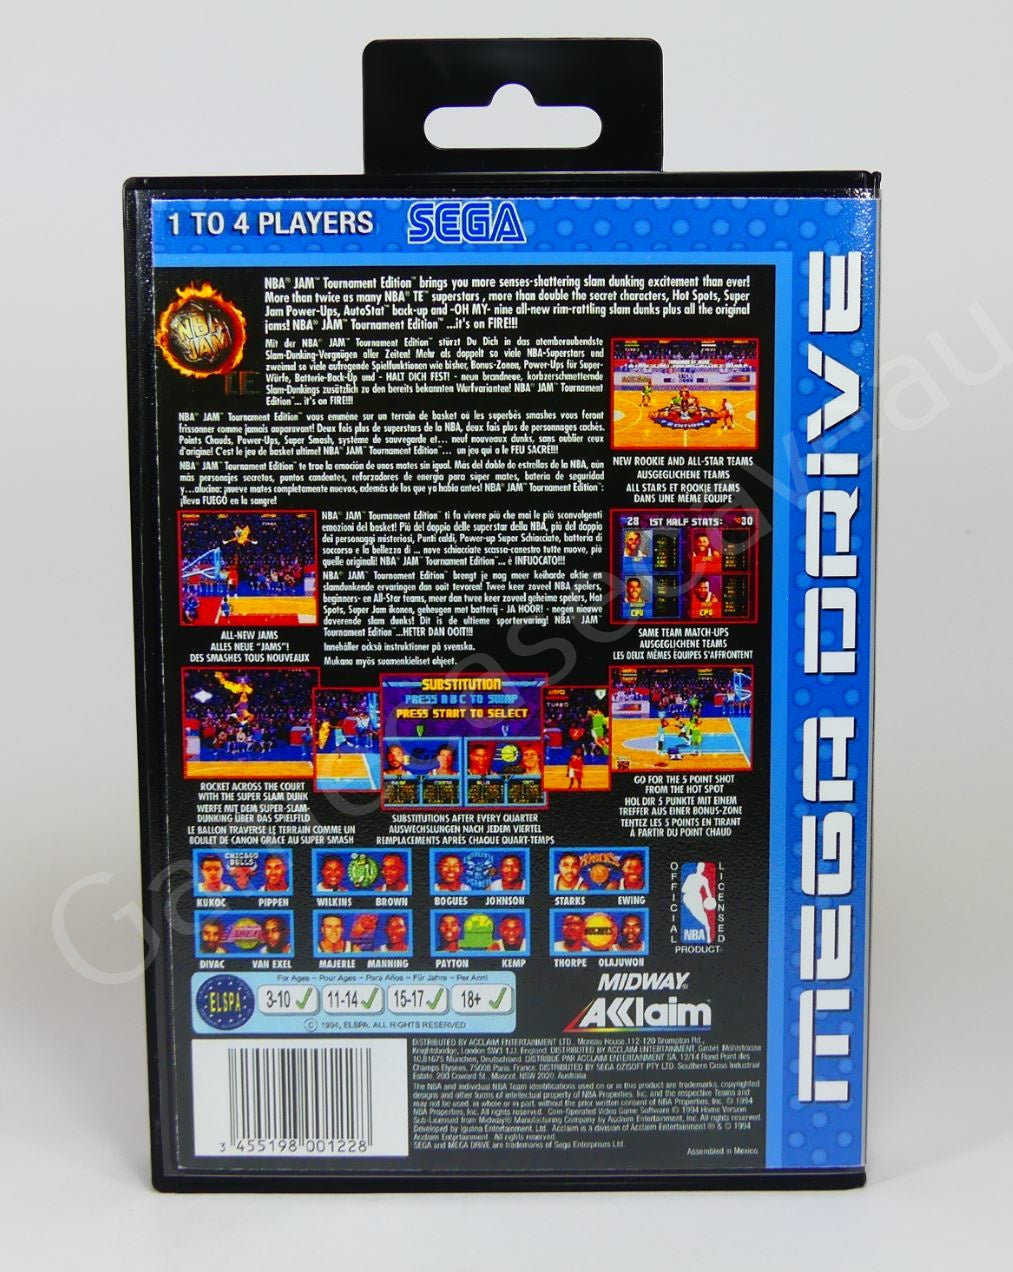 NBA Jam TE Tournament Edition - SMD Replacement Case